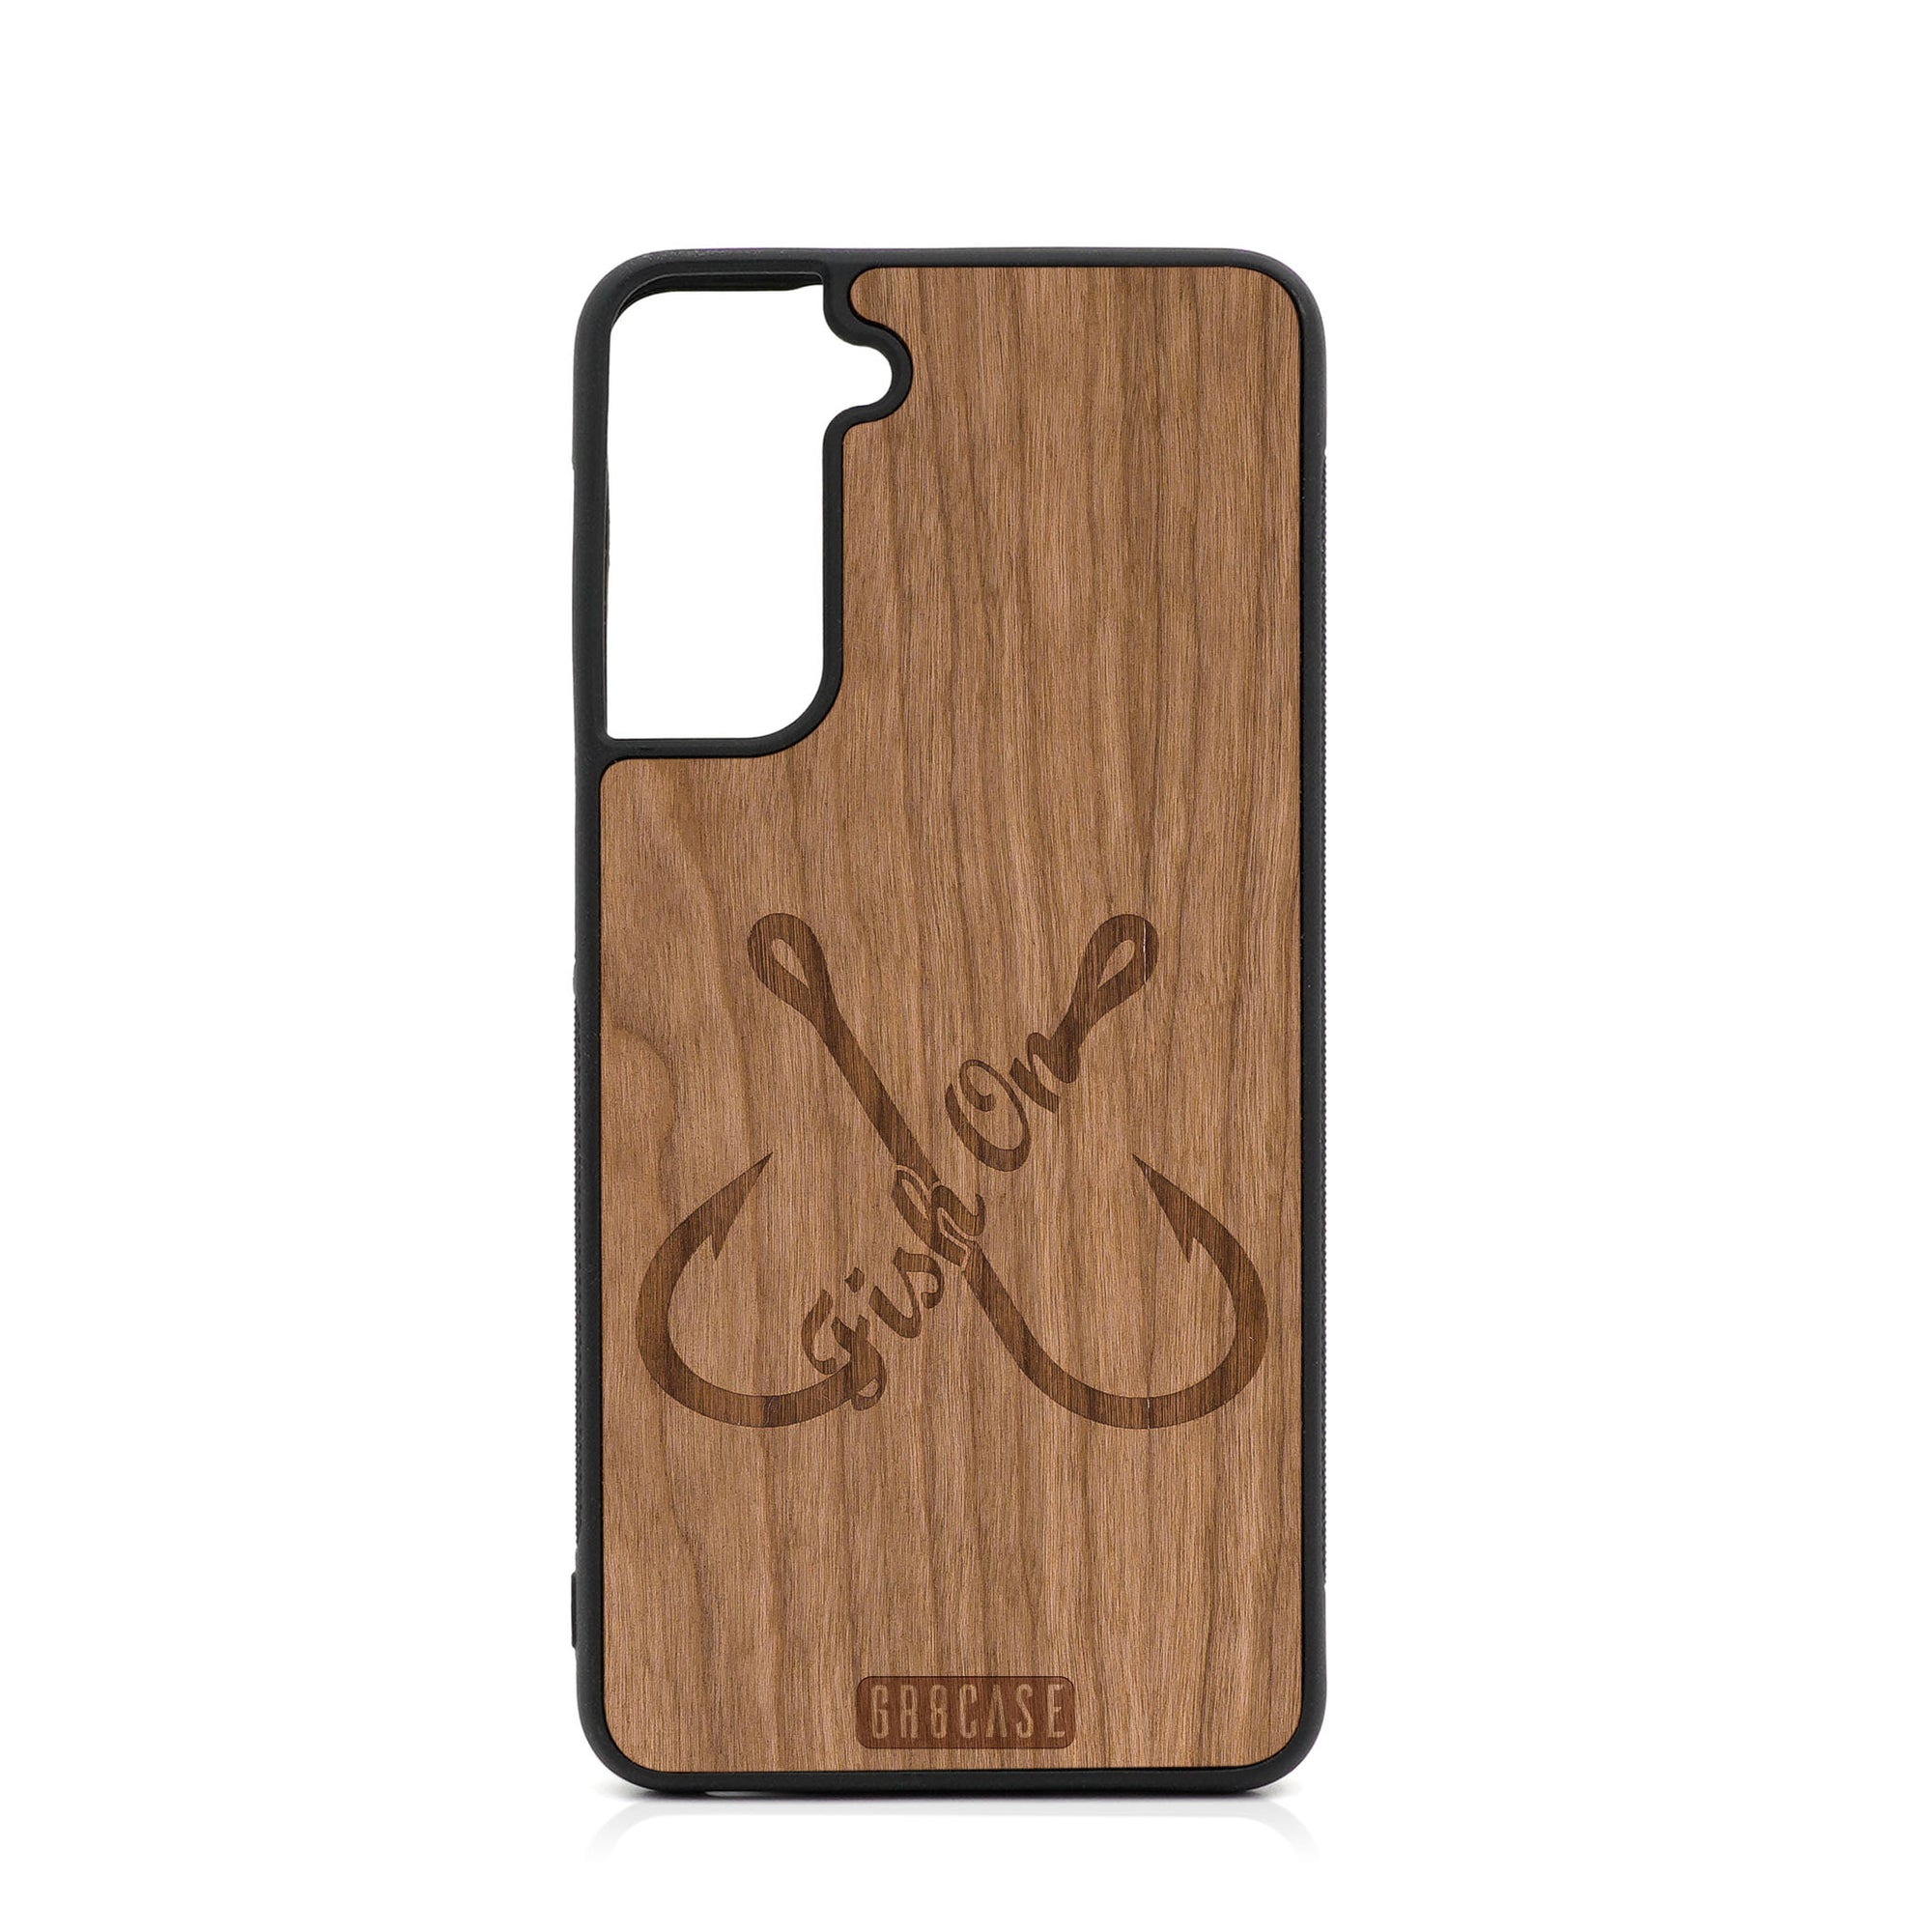 Fish On (Fish Hooks) Design Wood Case For Samsung Galaxy S21 Plus 5G